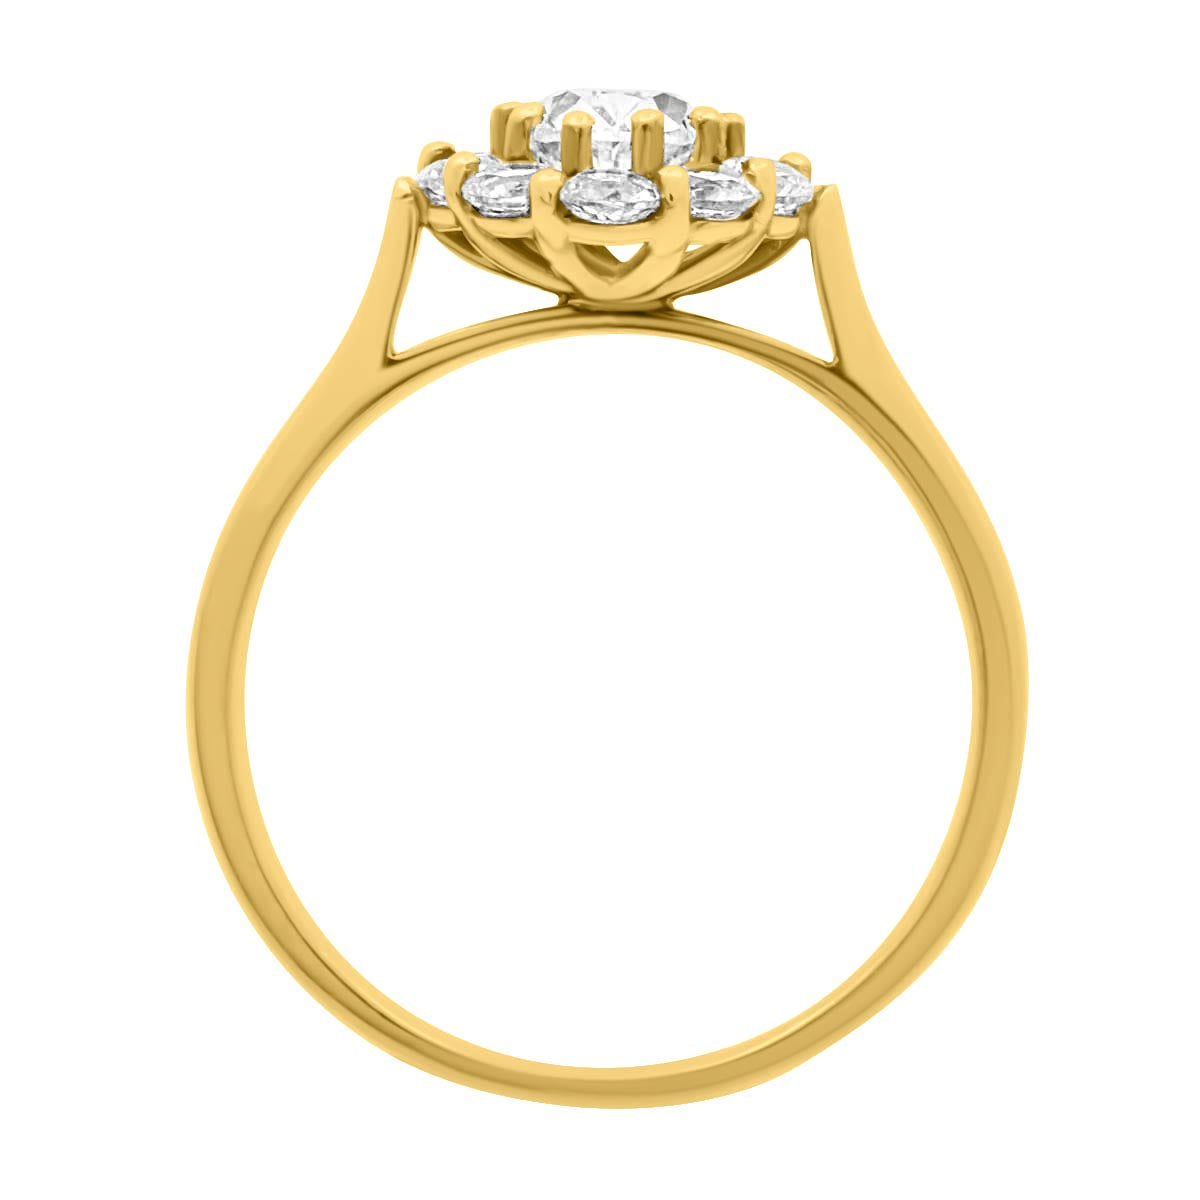 Cluster Engagement Ring in yellow gold upright and on a white background